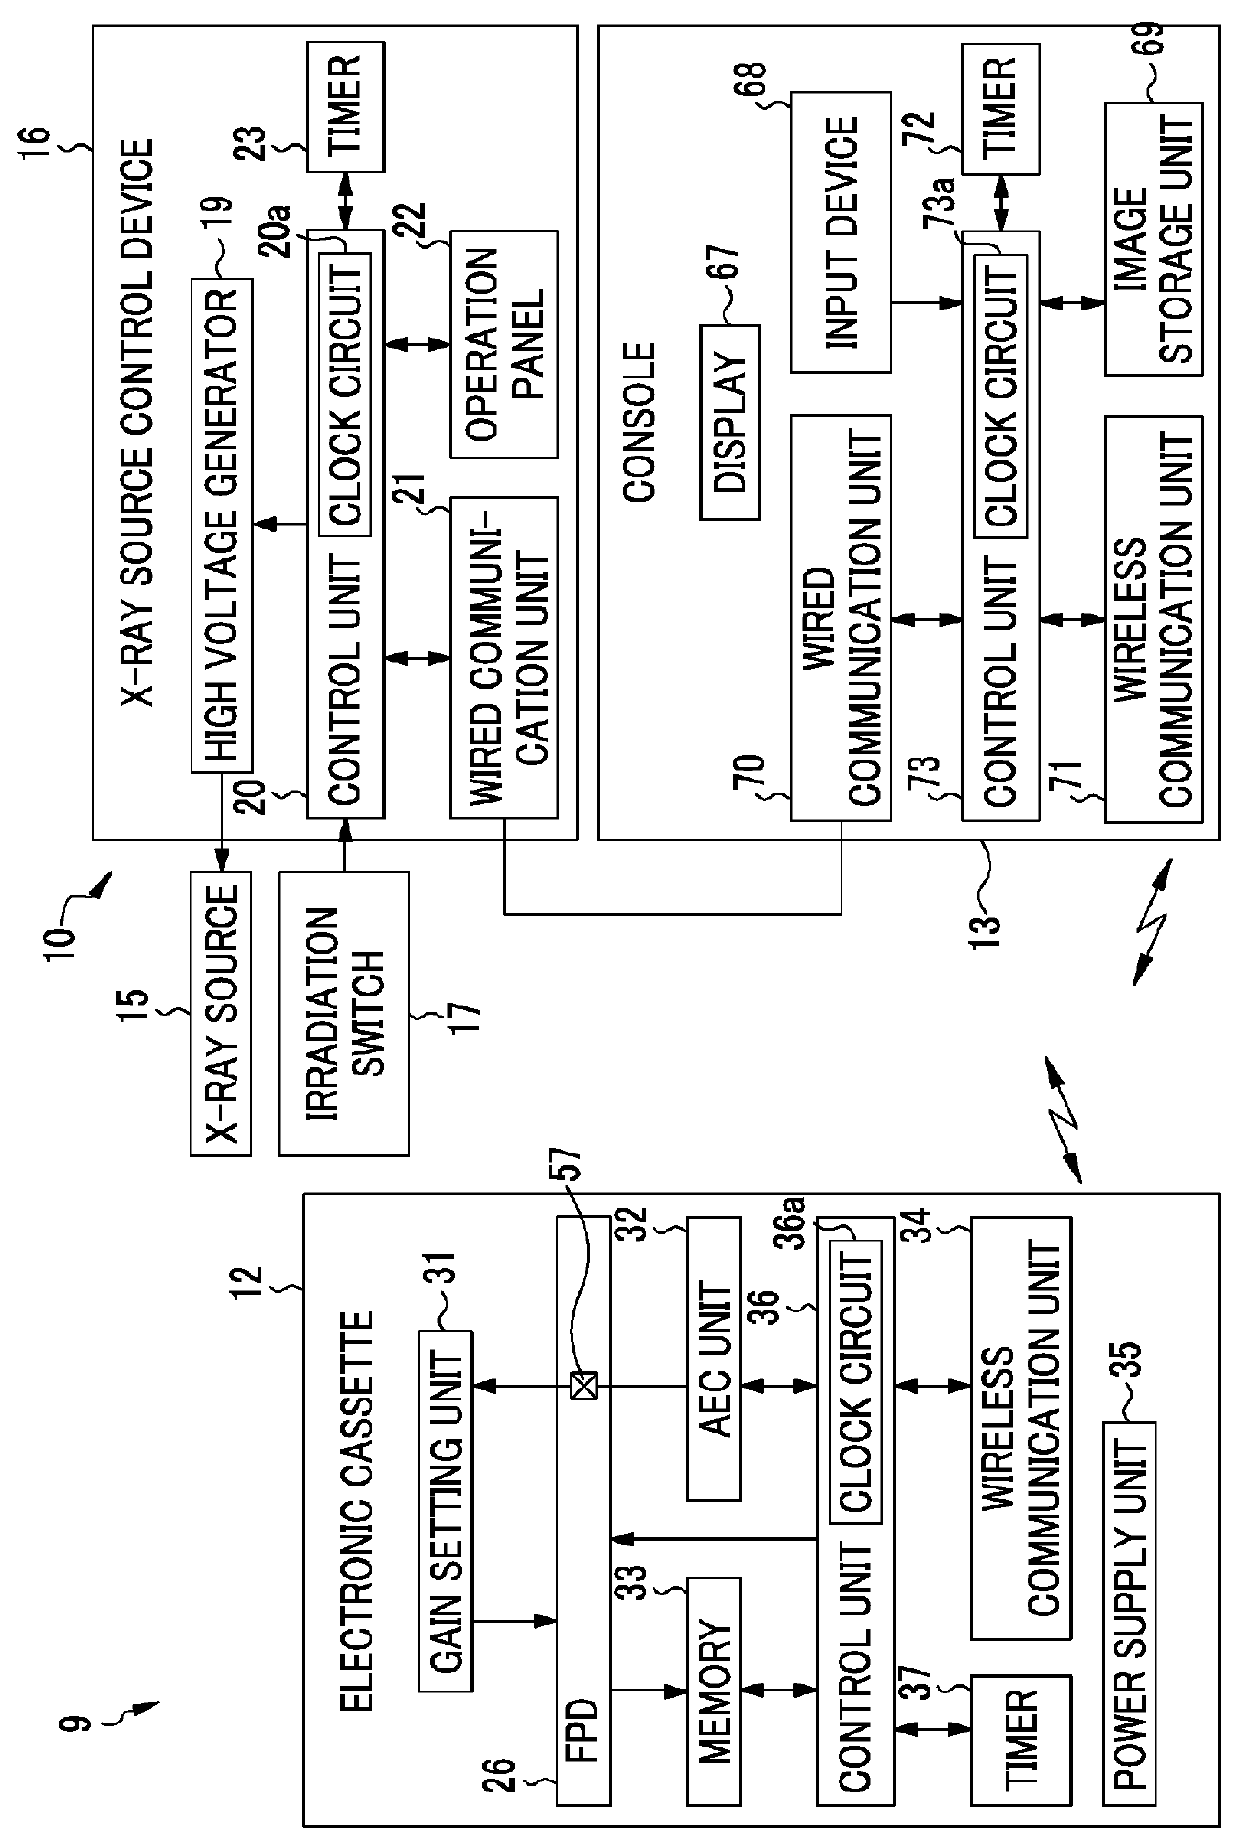 Radiographic imaging device and method with stop timing based on dosage detection